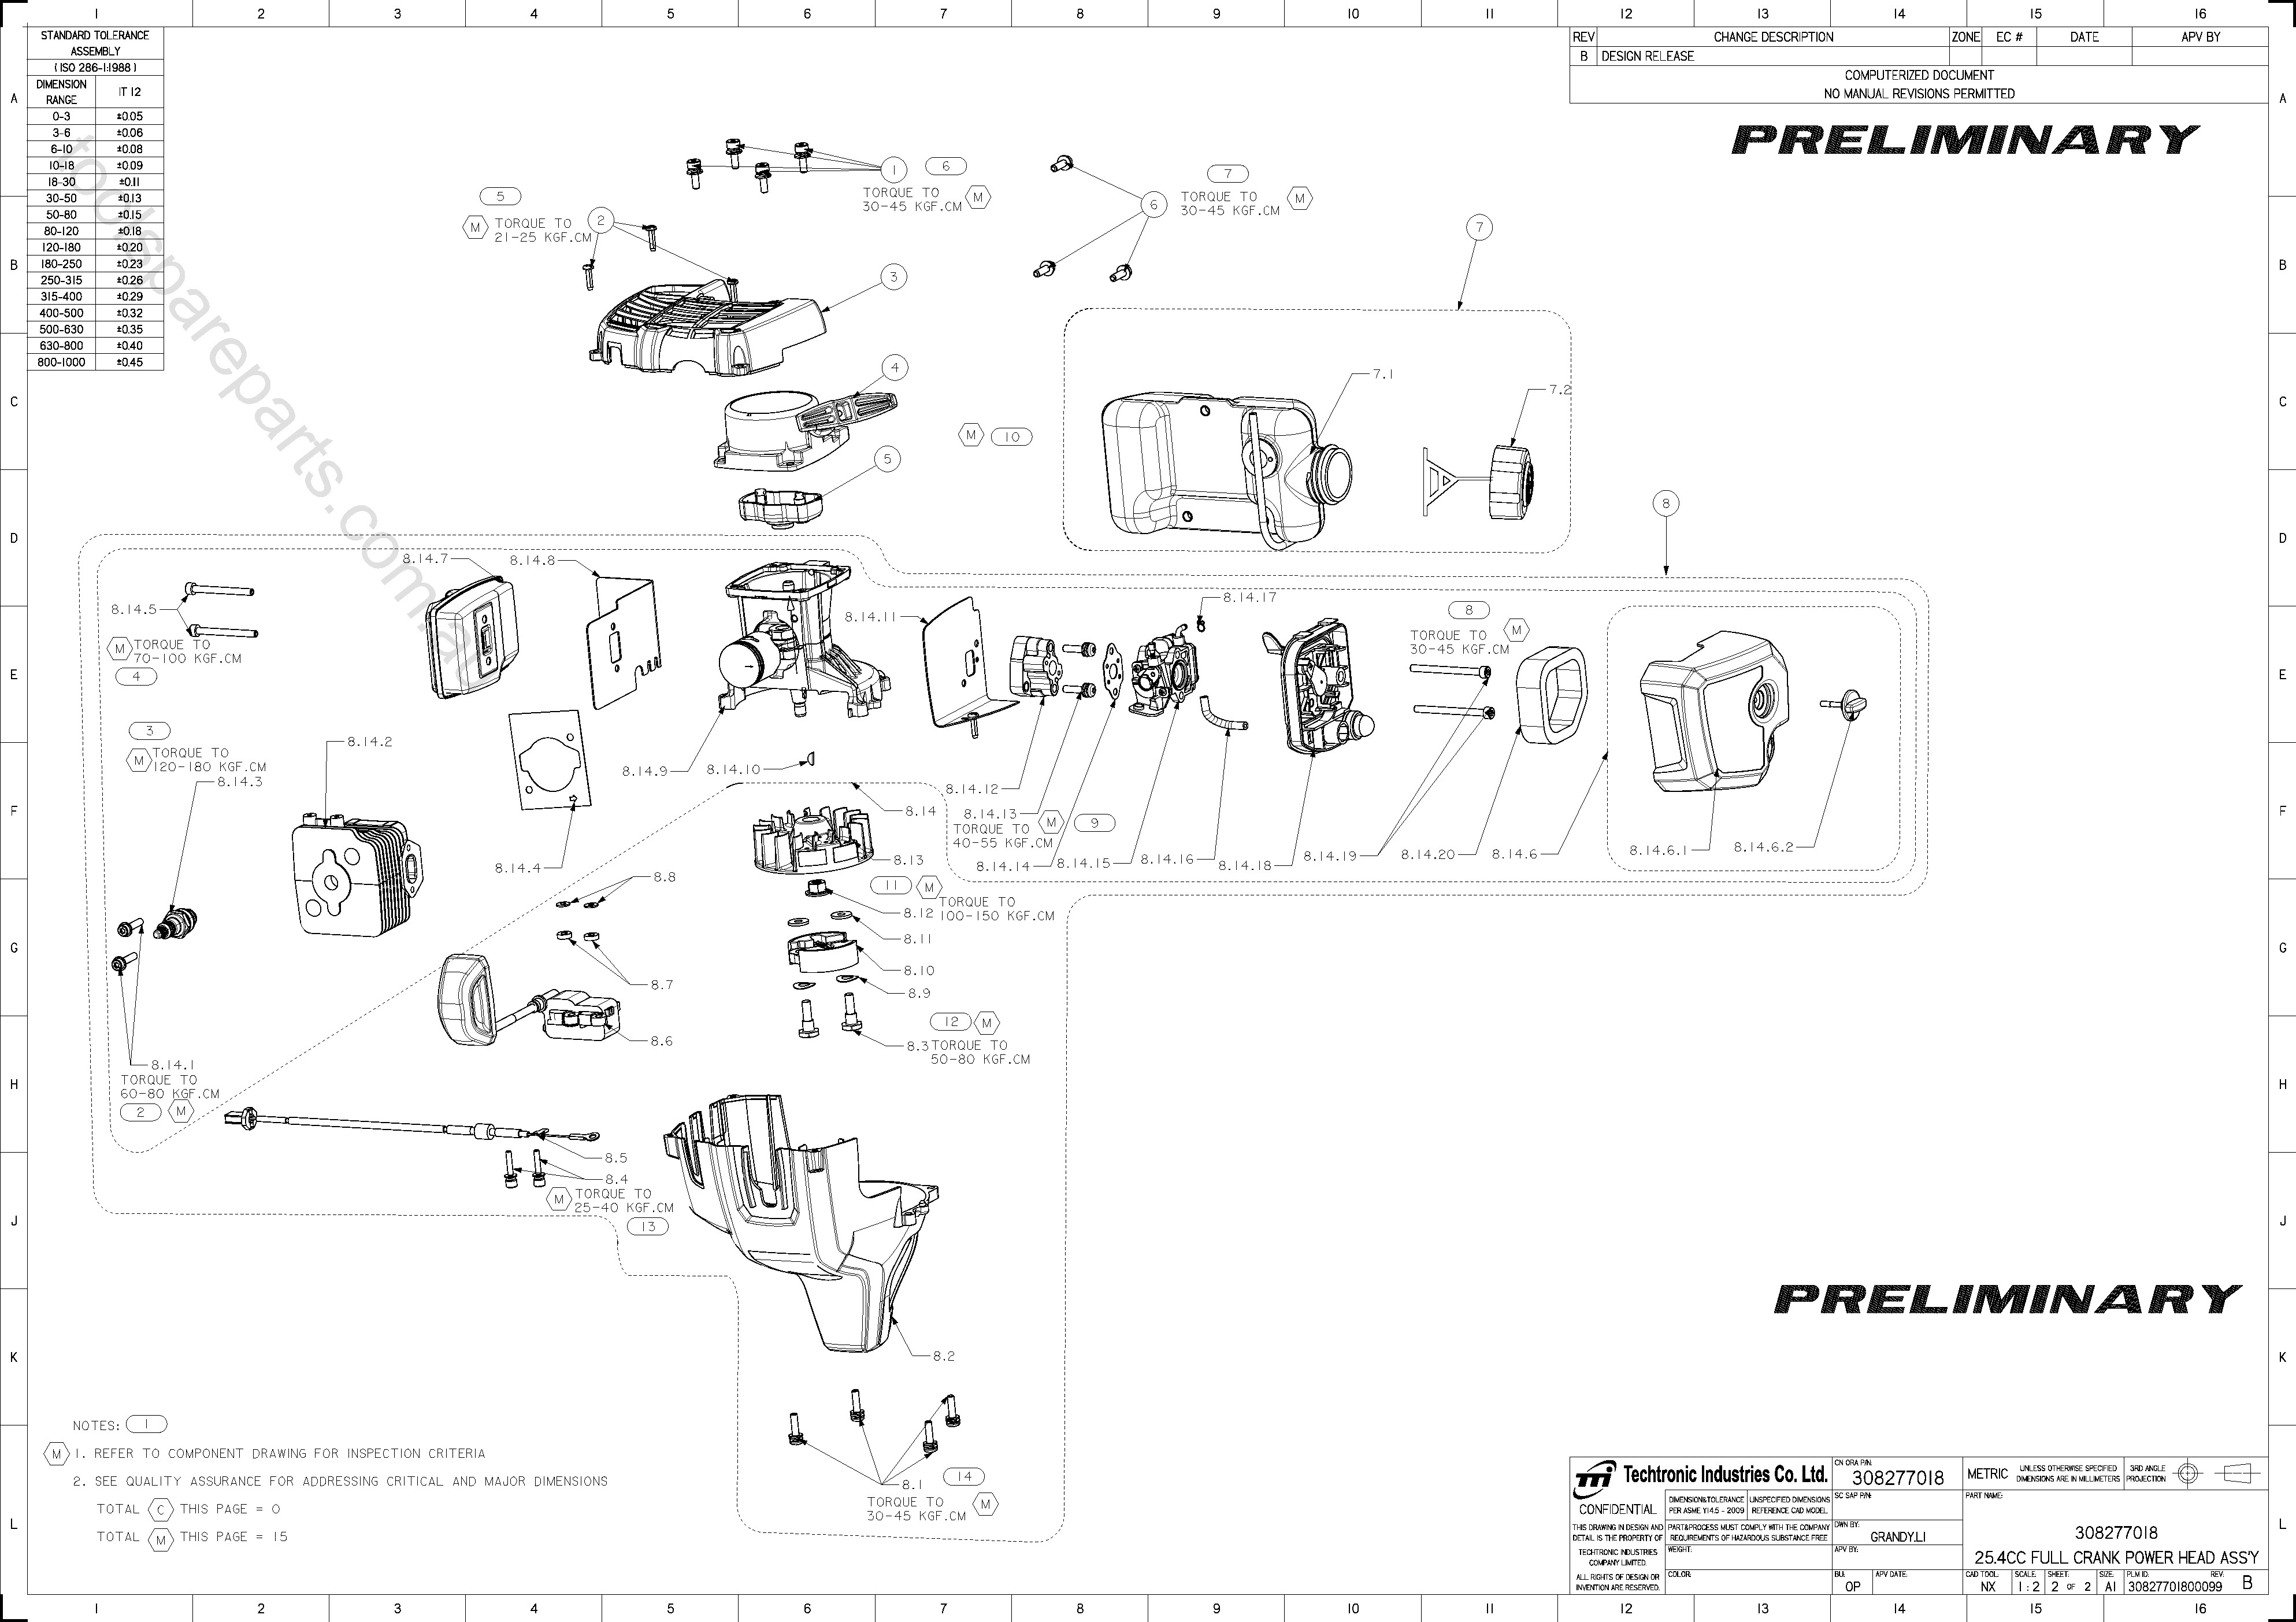 Homelite Trimmer Parts Diagram Genuine Spare Parts for All the Biggest Brands From Makita Ryobi Of Homelite Trimmer Parts Diagram